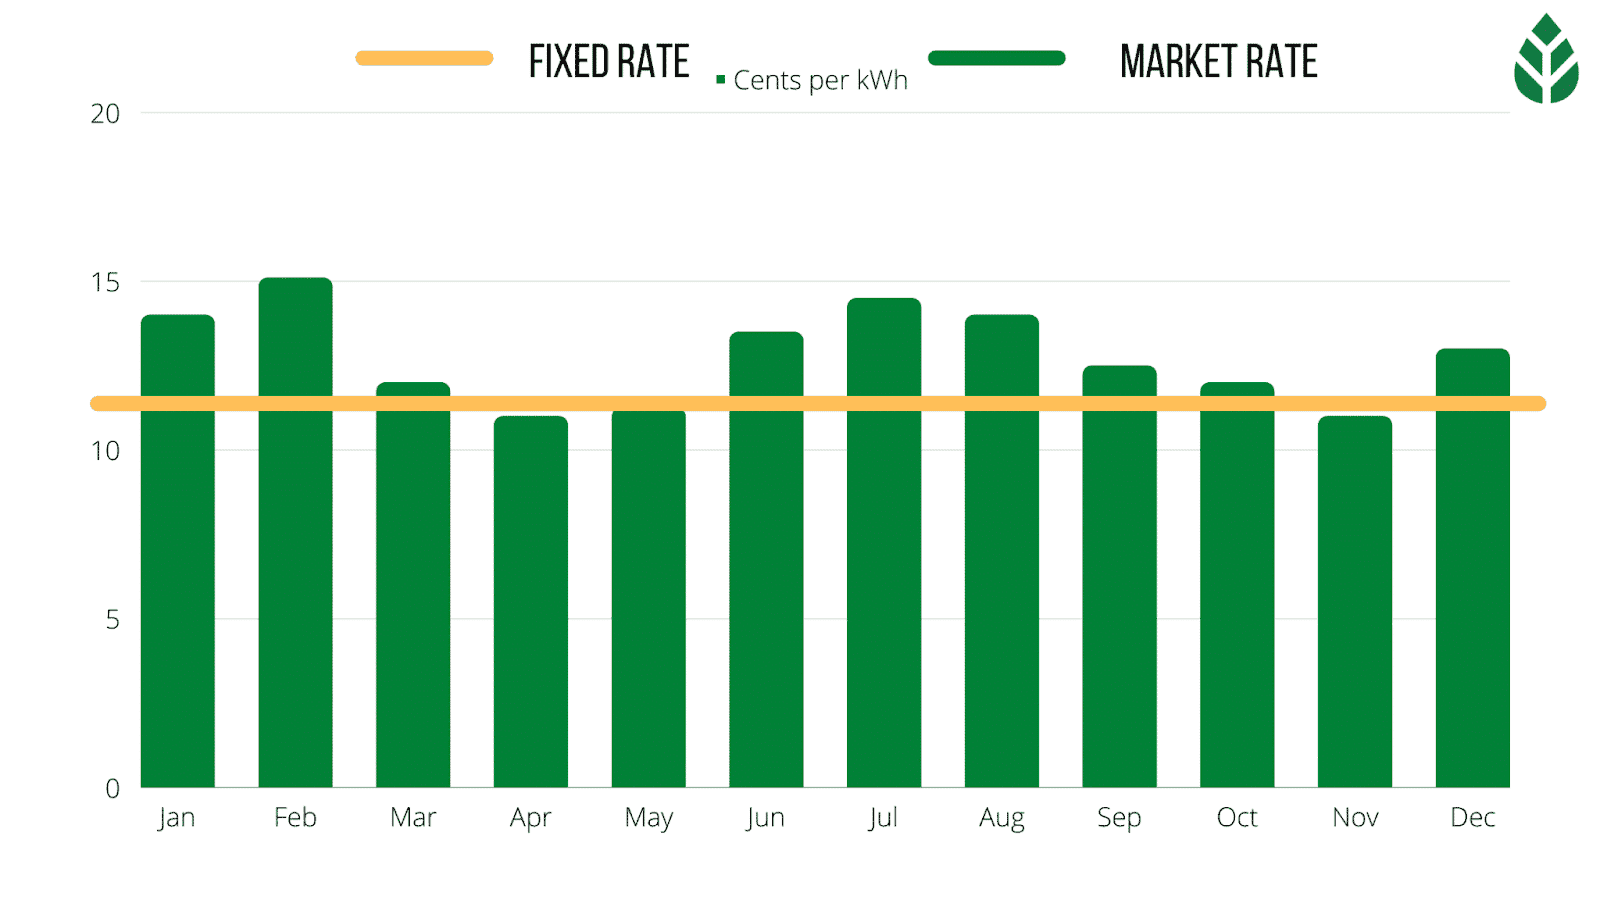 Fixed Rate vs Market Rate Electricity Rates in Texas